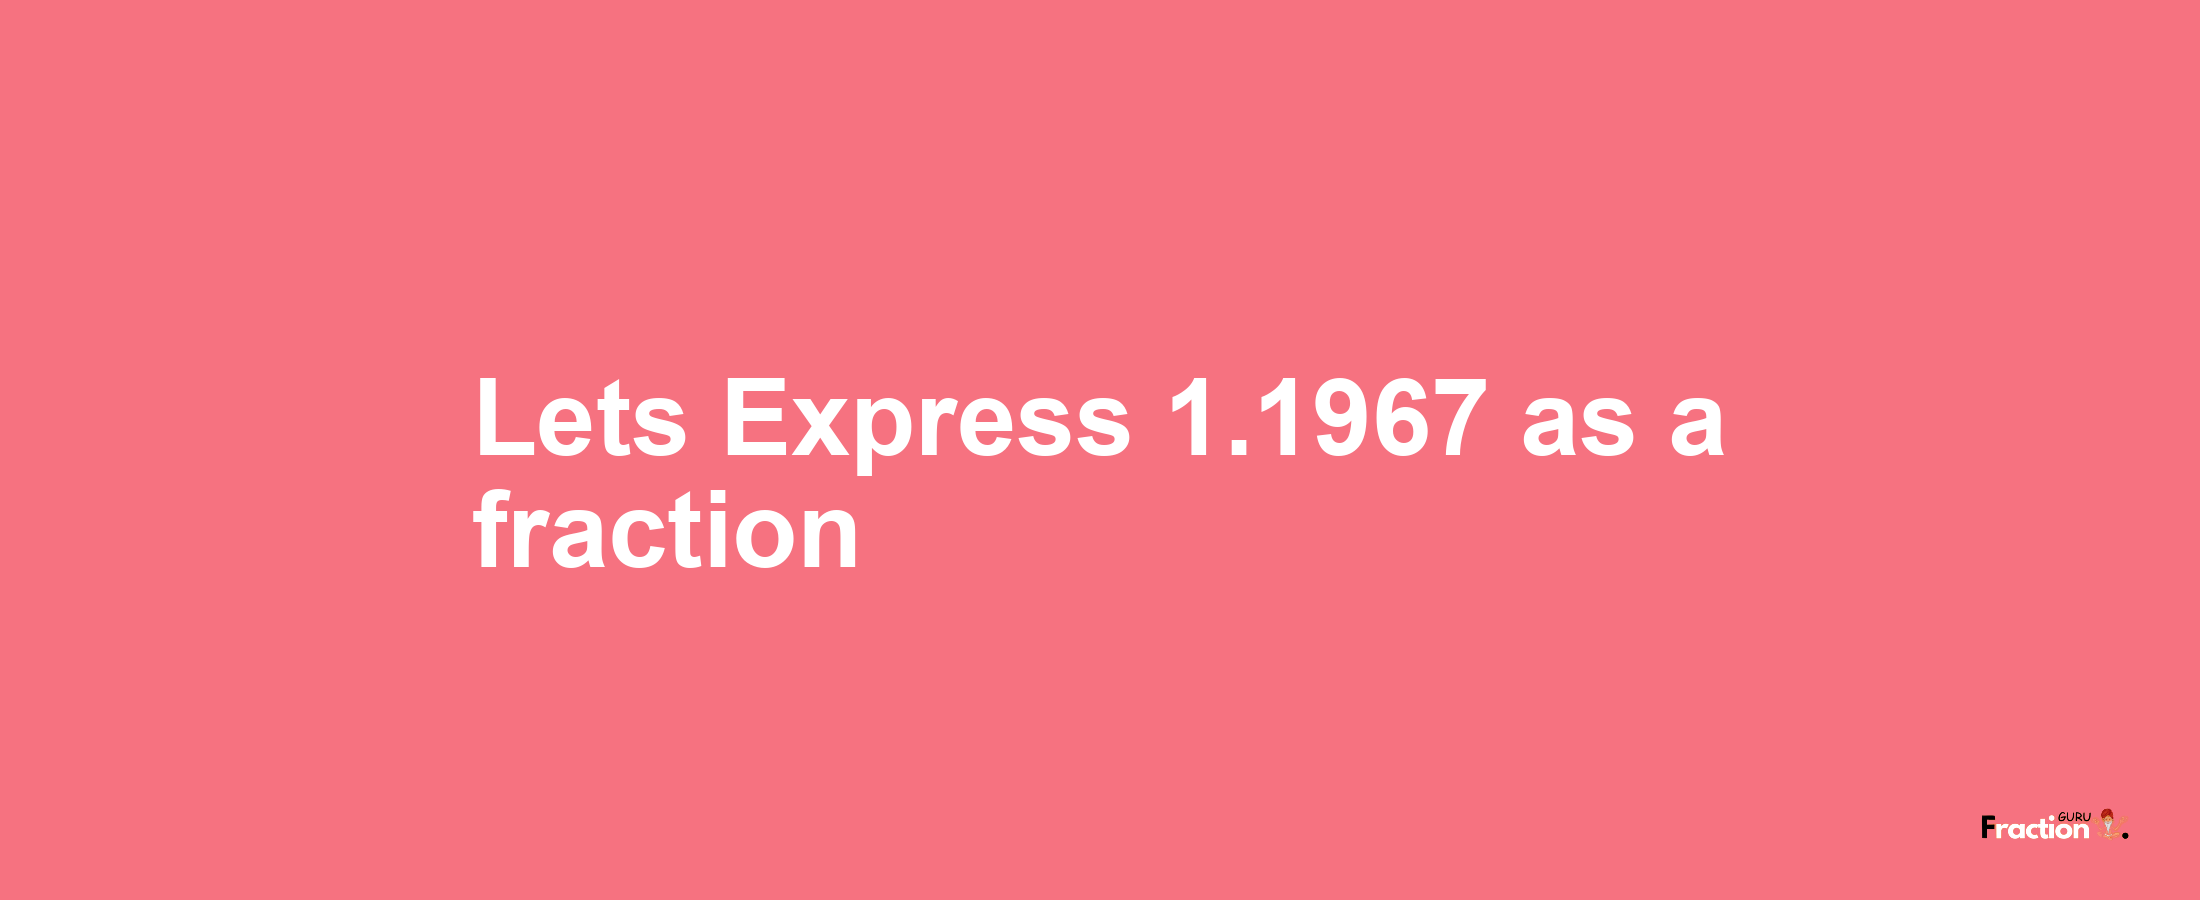 Lets Express 1.1967 as afraction